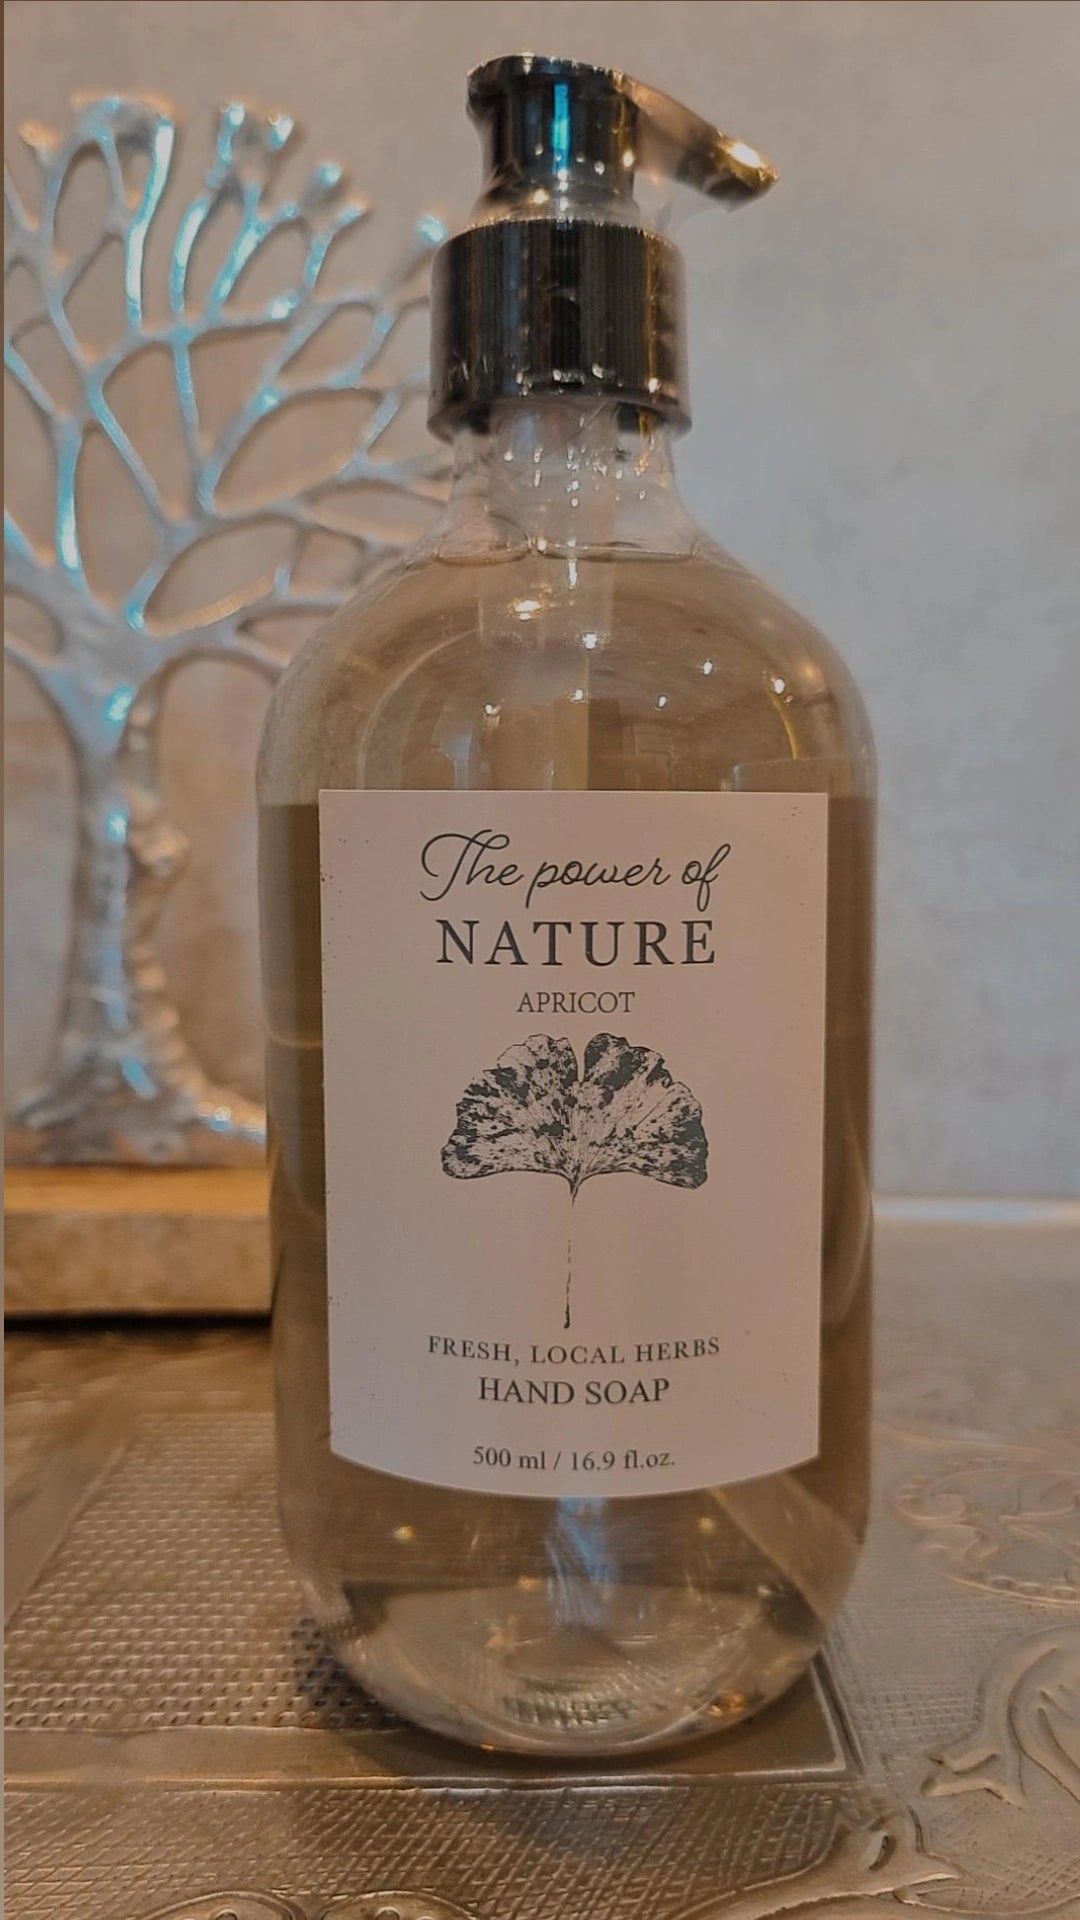 Hand soap The power of Nature Apricot 500ml